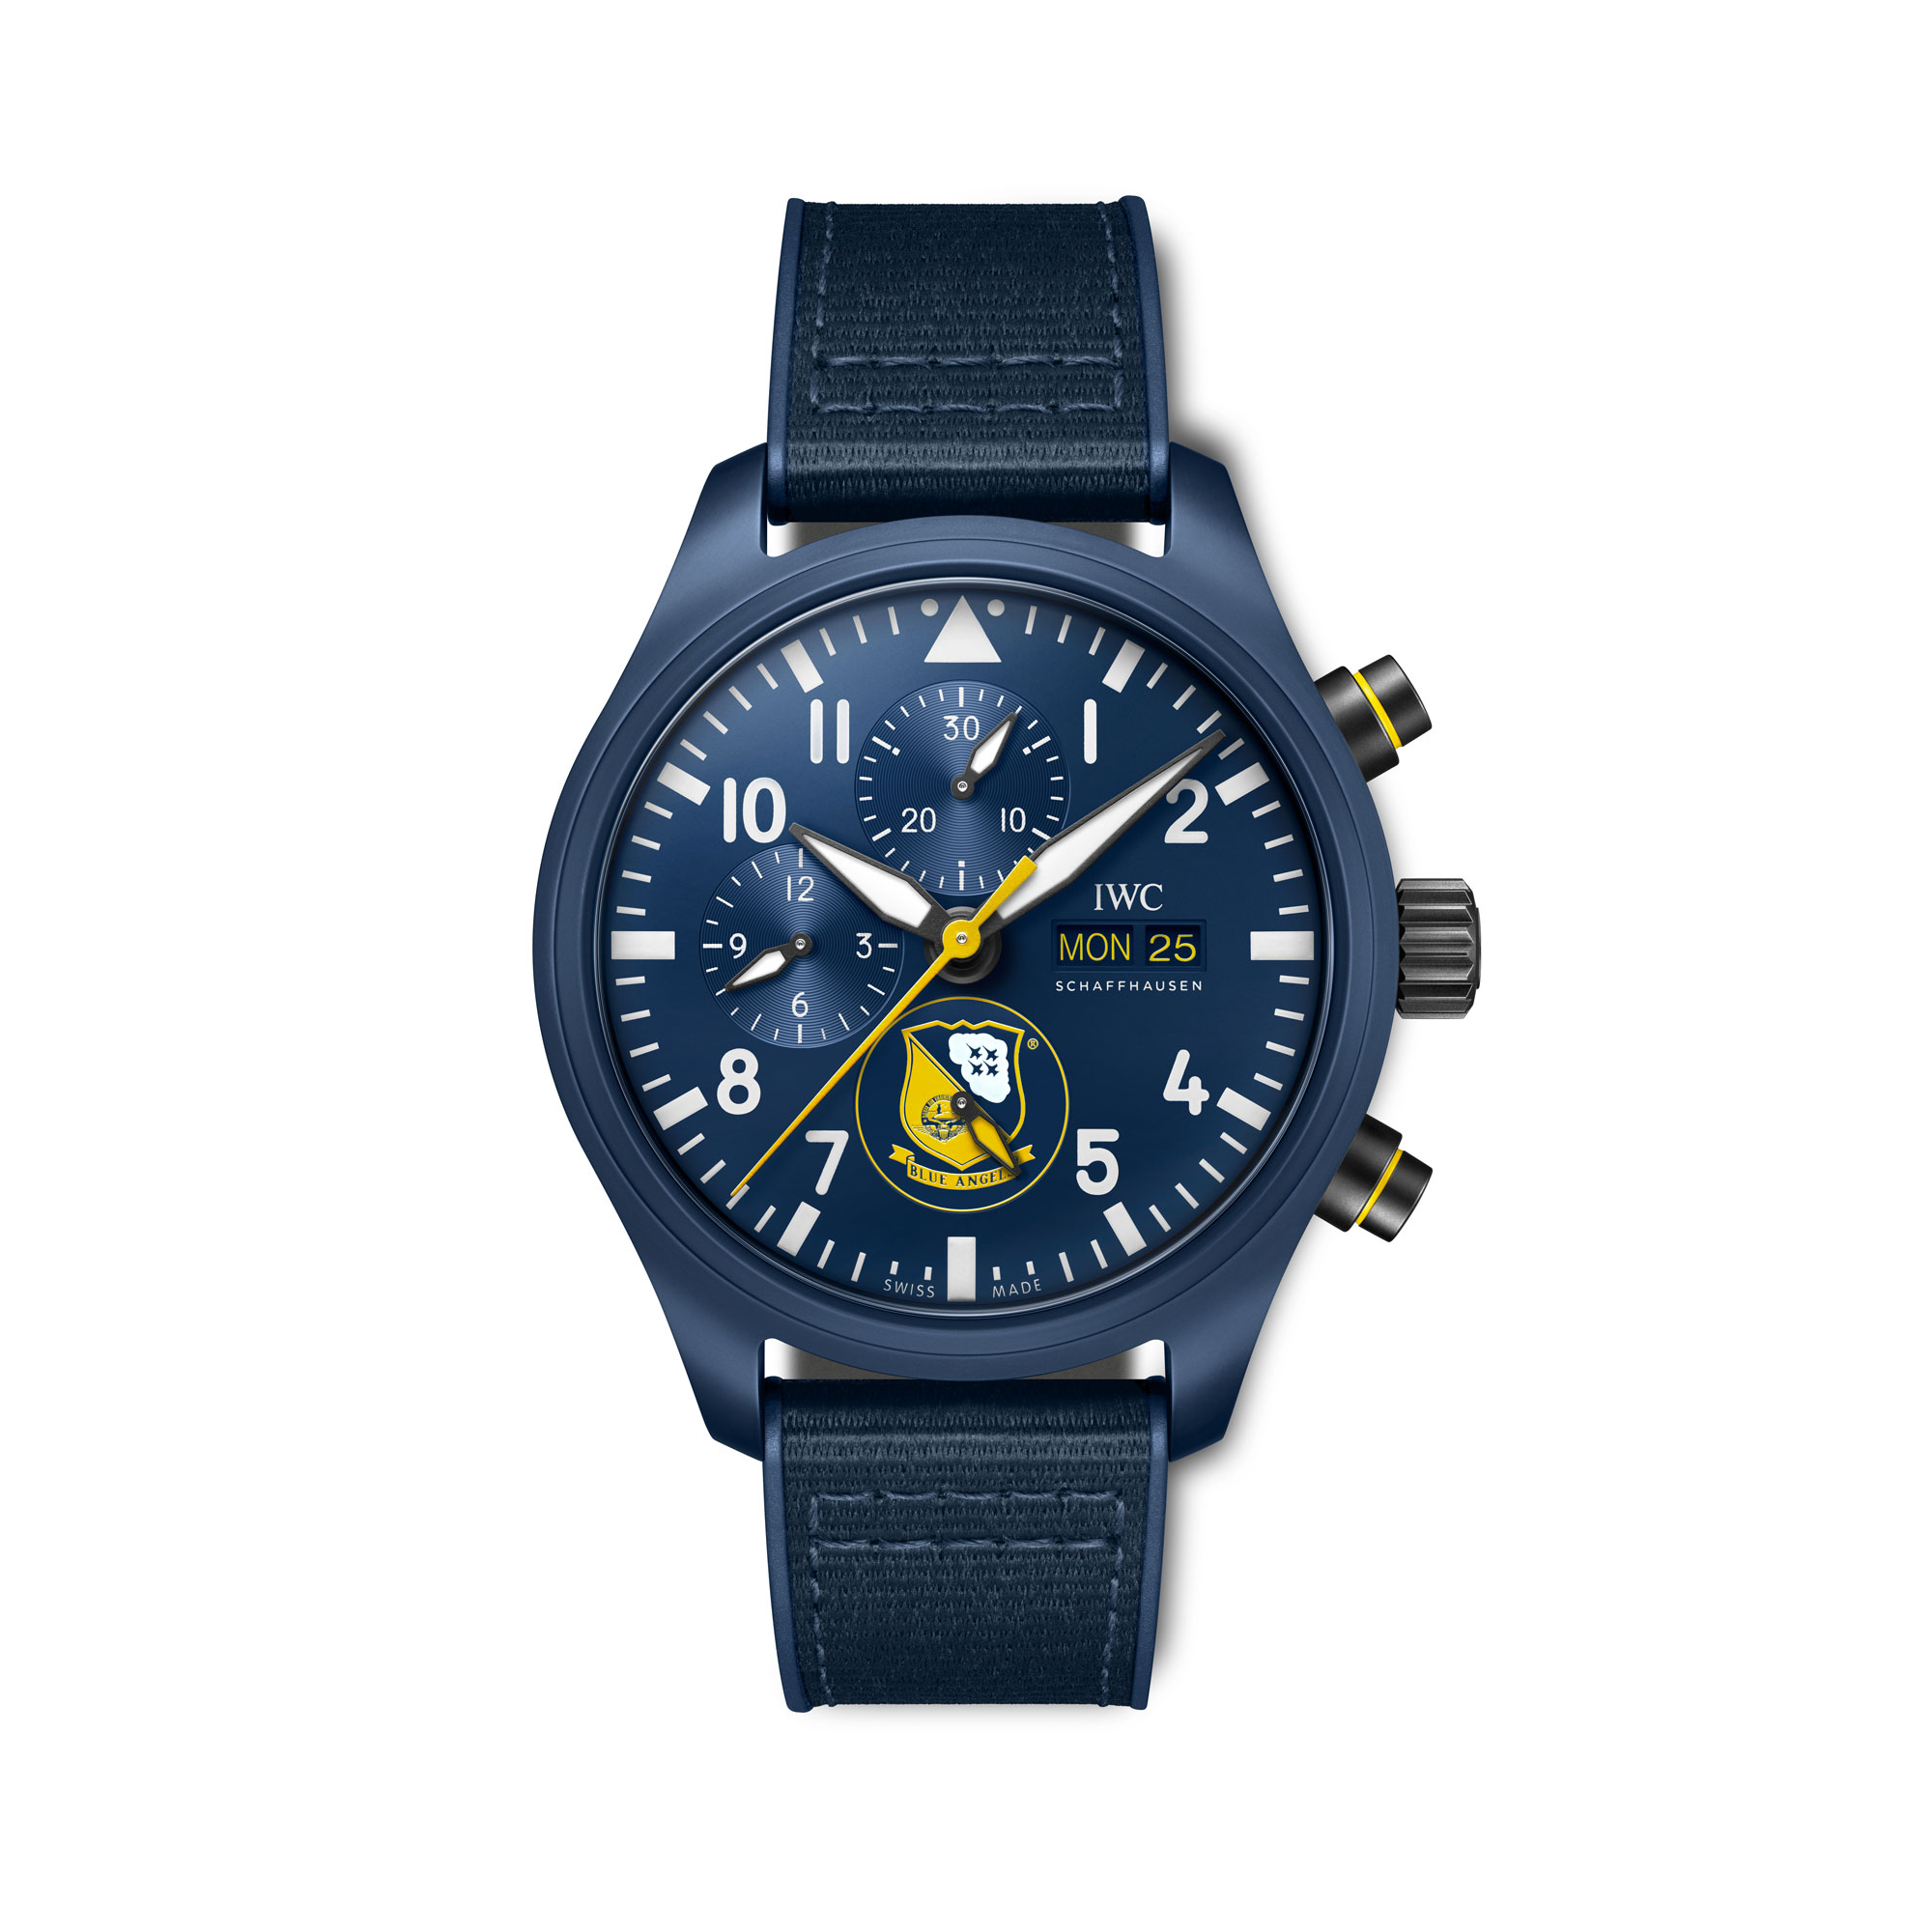 IWC Pilot's Watch Chronograph Edition Royal Maces - Ref. IW389107